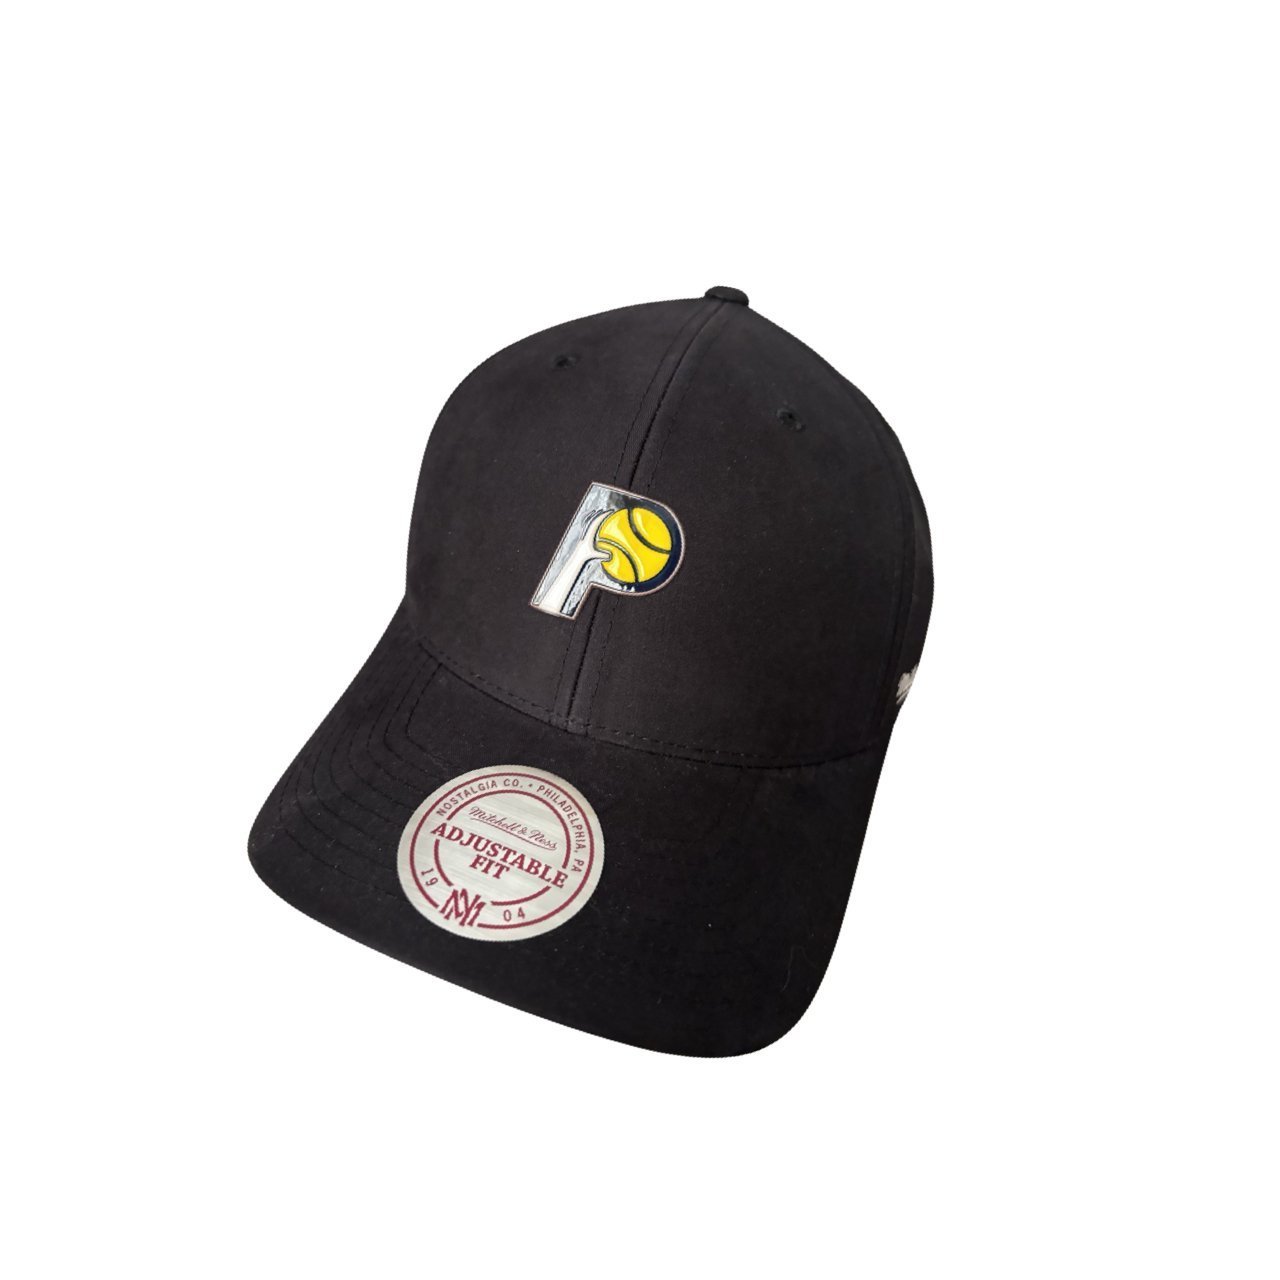 Indiana Pacers NBA Mitchell & Ness HWC Black Basketball Snapback Cap with Round Brim - Soul and Sense Streetwear